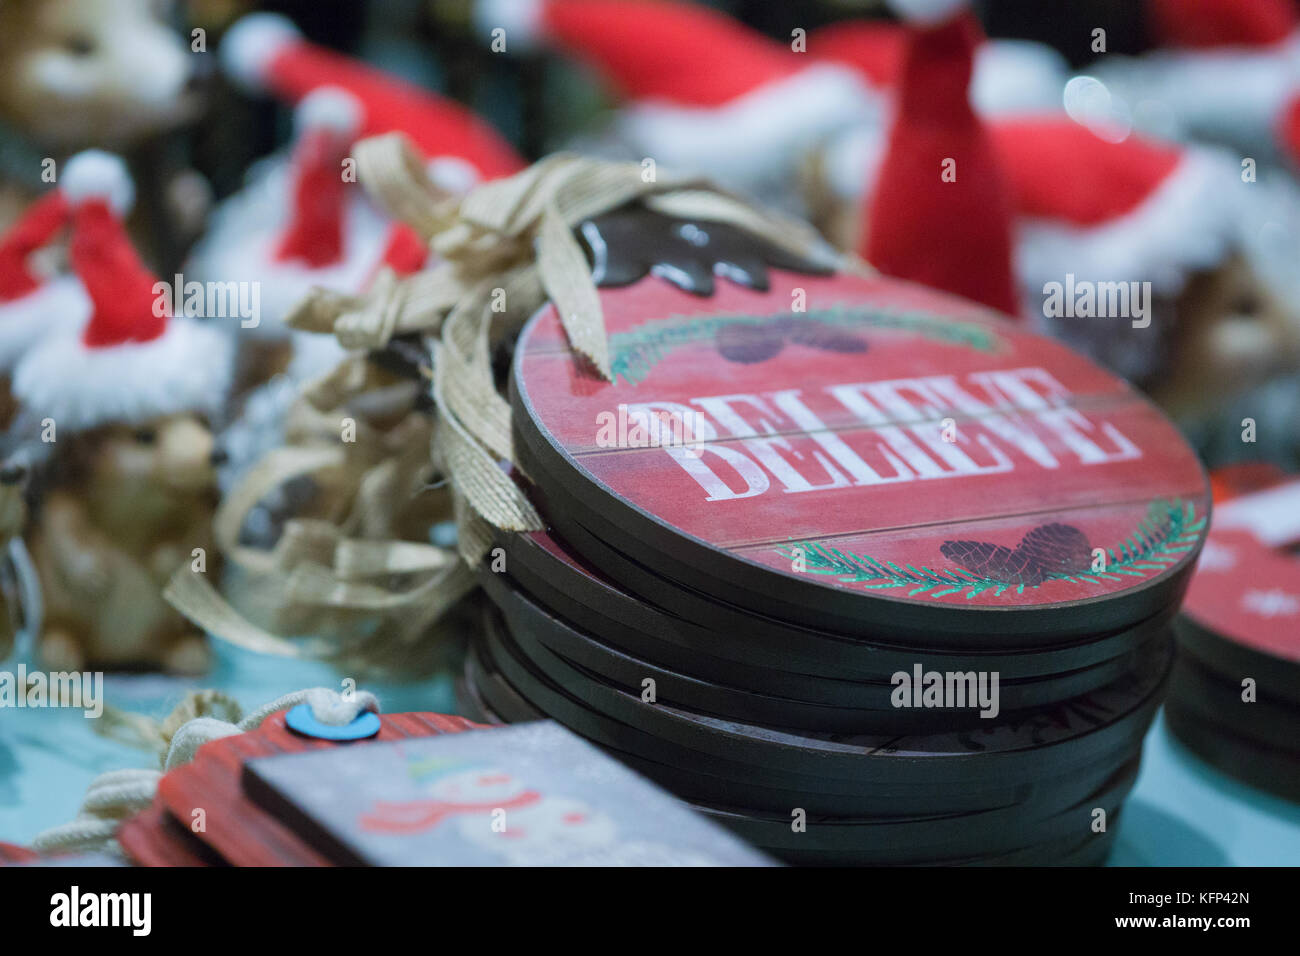 A Christmas display highlighting the word Believe Stock Photo